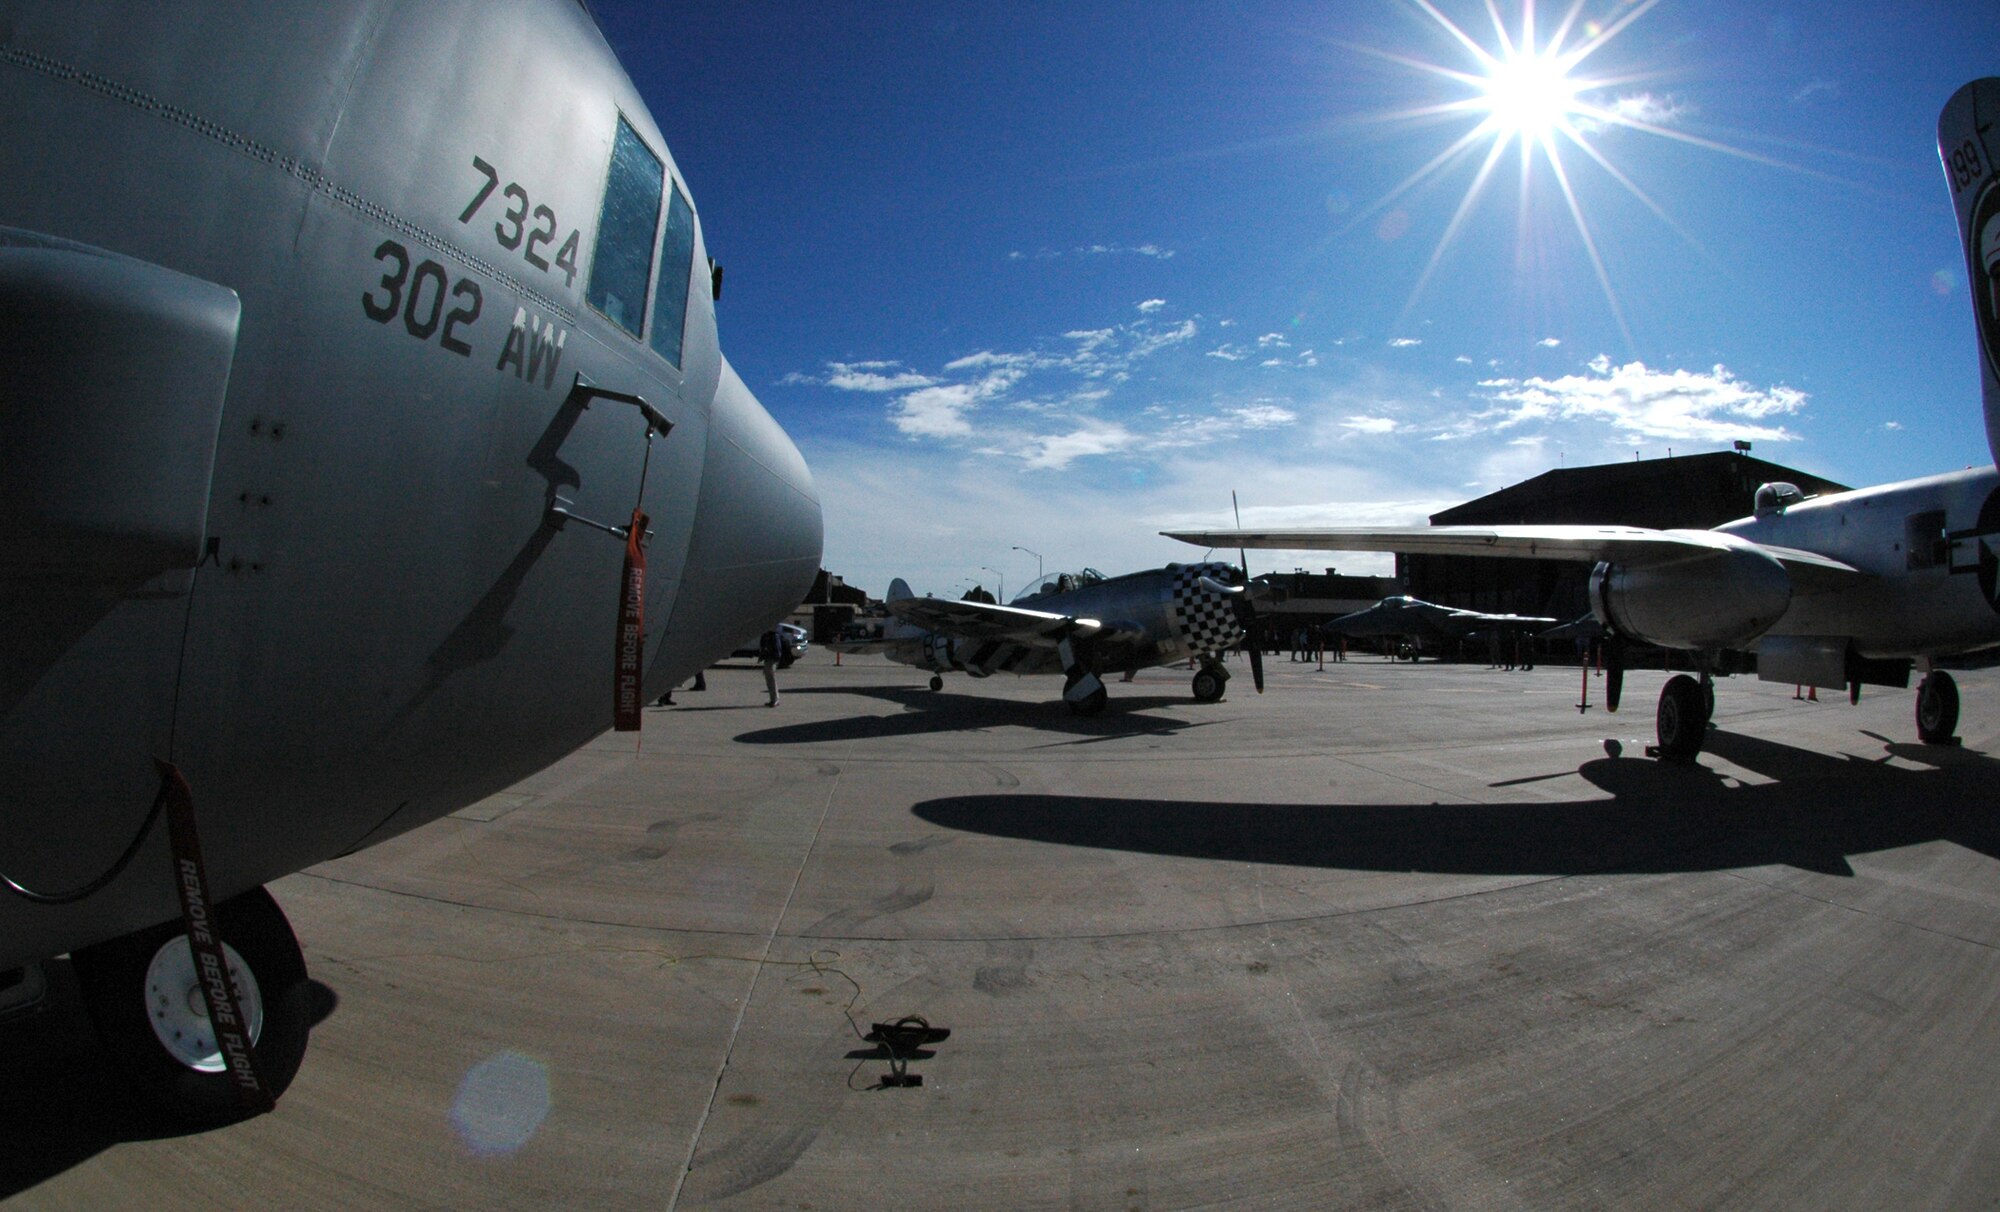 A 302nd Airlift Wing-assigned C-130 gleams in the Colorado morning sun May 19 with two, World War II-era aircraft, including the P-47 Thunderbolt fighter plane (center) and a B-25 Mitchell bomber (right) at Peterson Air Force Base, Colo. The aircraft were joined by an F-15C Eagle, a Colorado Air National Guard F-16 Fighting Falcon and a Canadian CF-18 Hornet as part of a change of command ceremony for the North American Aerospace Defense Command and U.S. Northern Command organizations. The 302nd Airlift Wing is an Air Force Reserve Command-assigned unit. (U.S. Air Force photo/Staff Sgt. Stephen J. Collier)